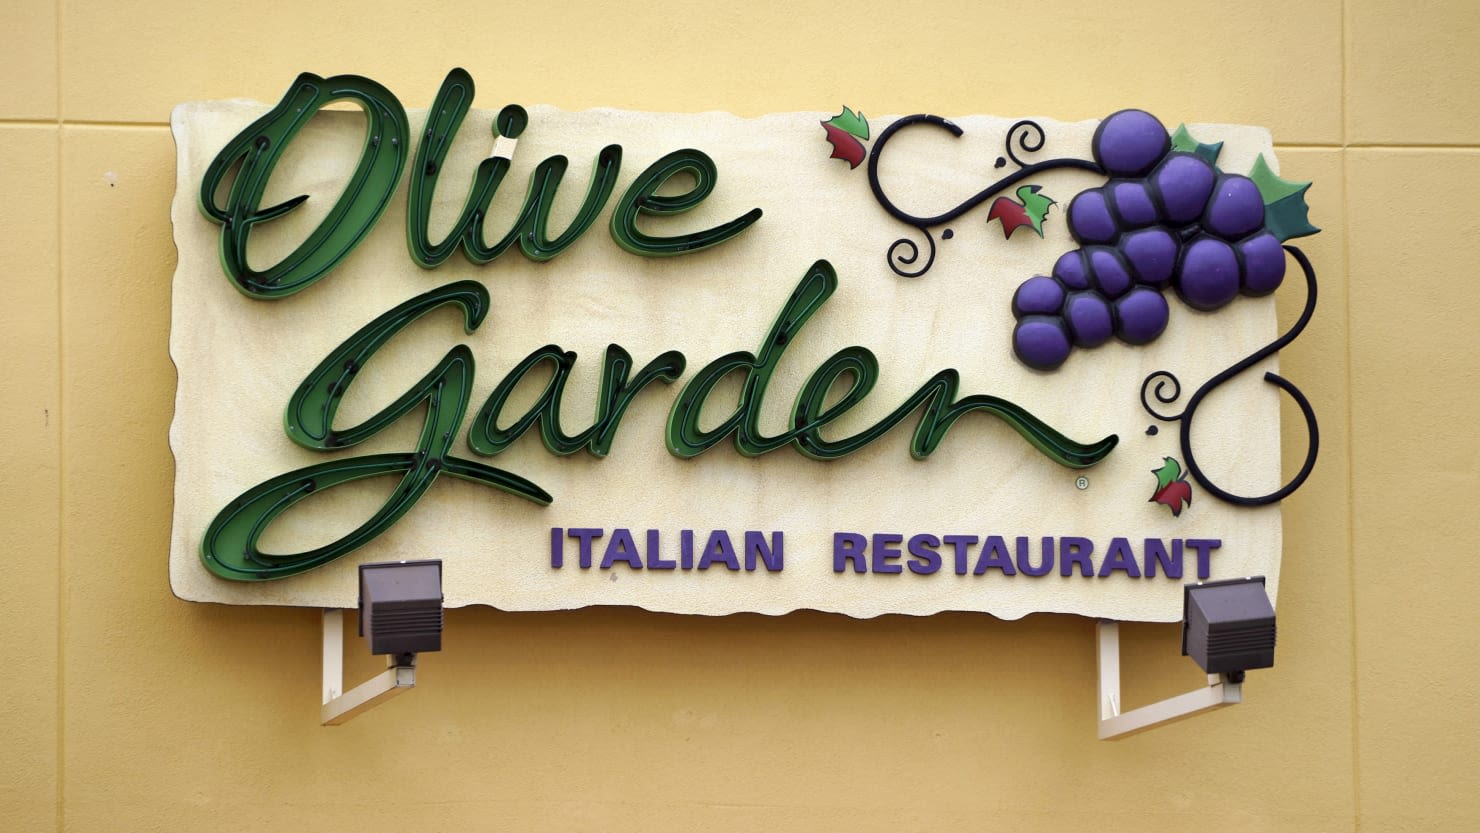 Olive Garden Cook Sues Over Co-Worker’s Ceaseless Dry-Humping